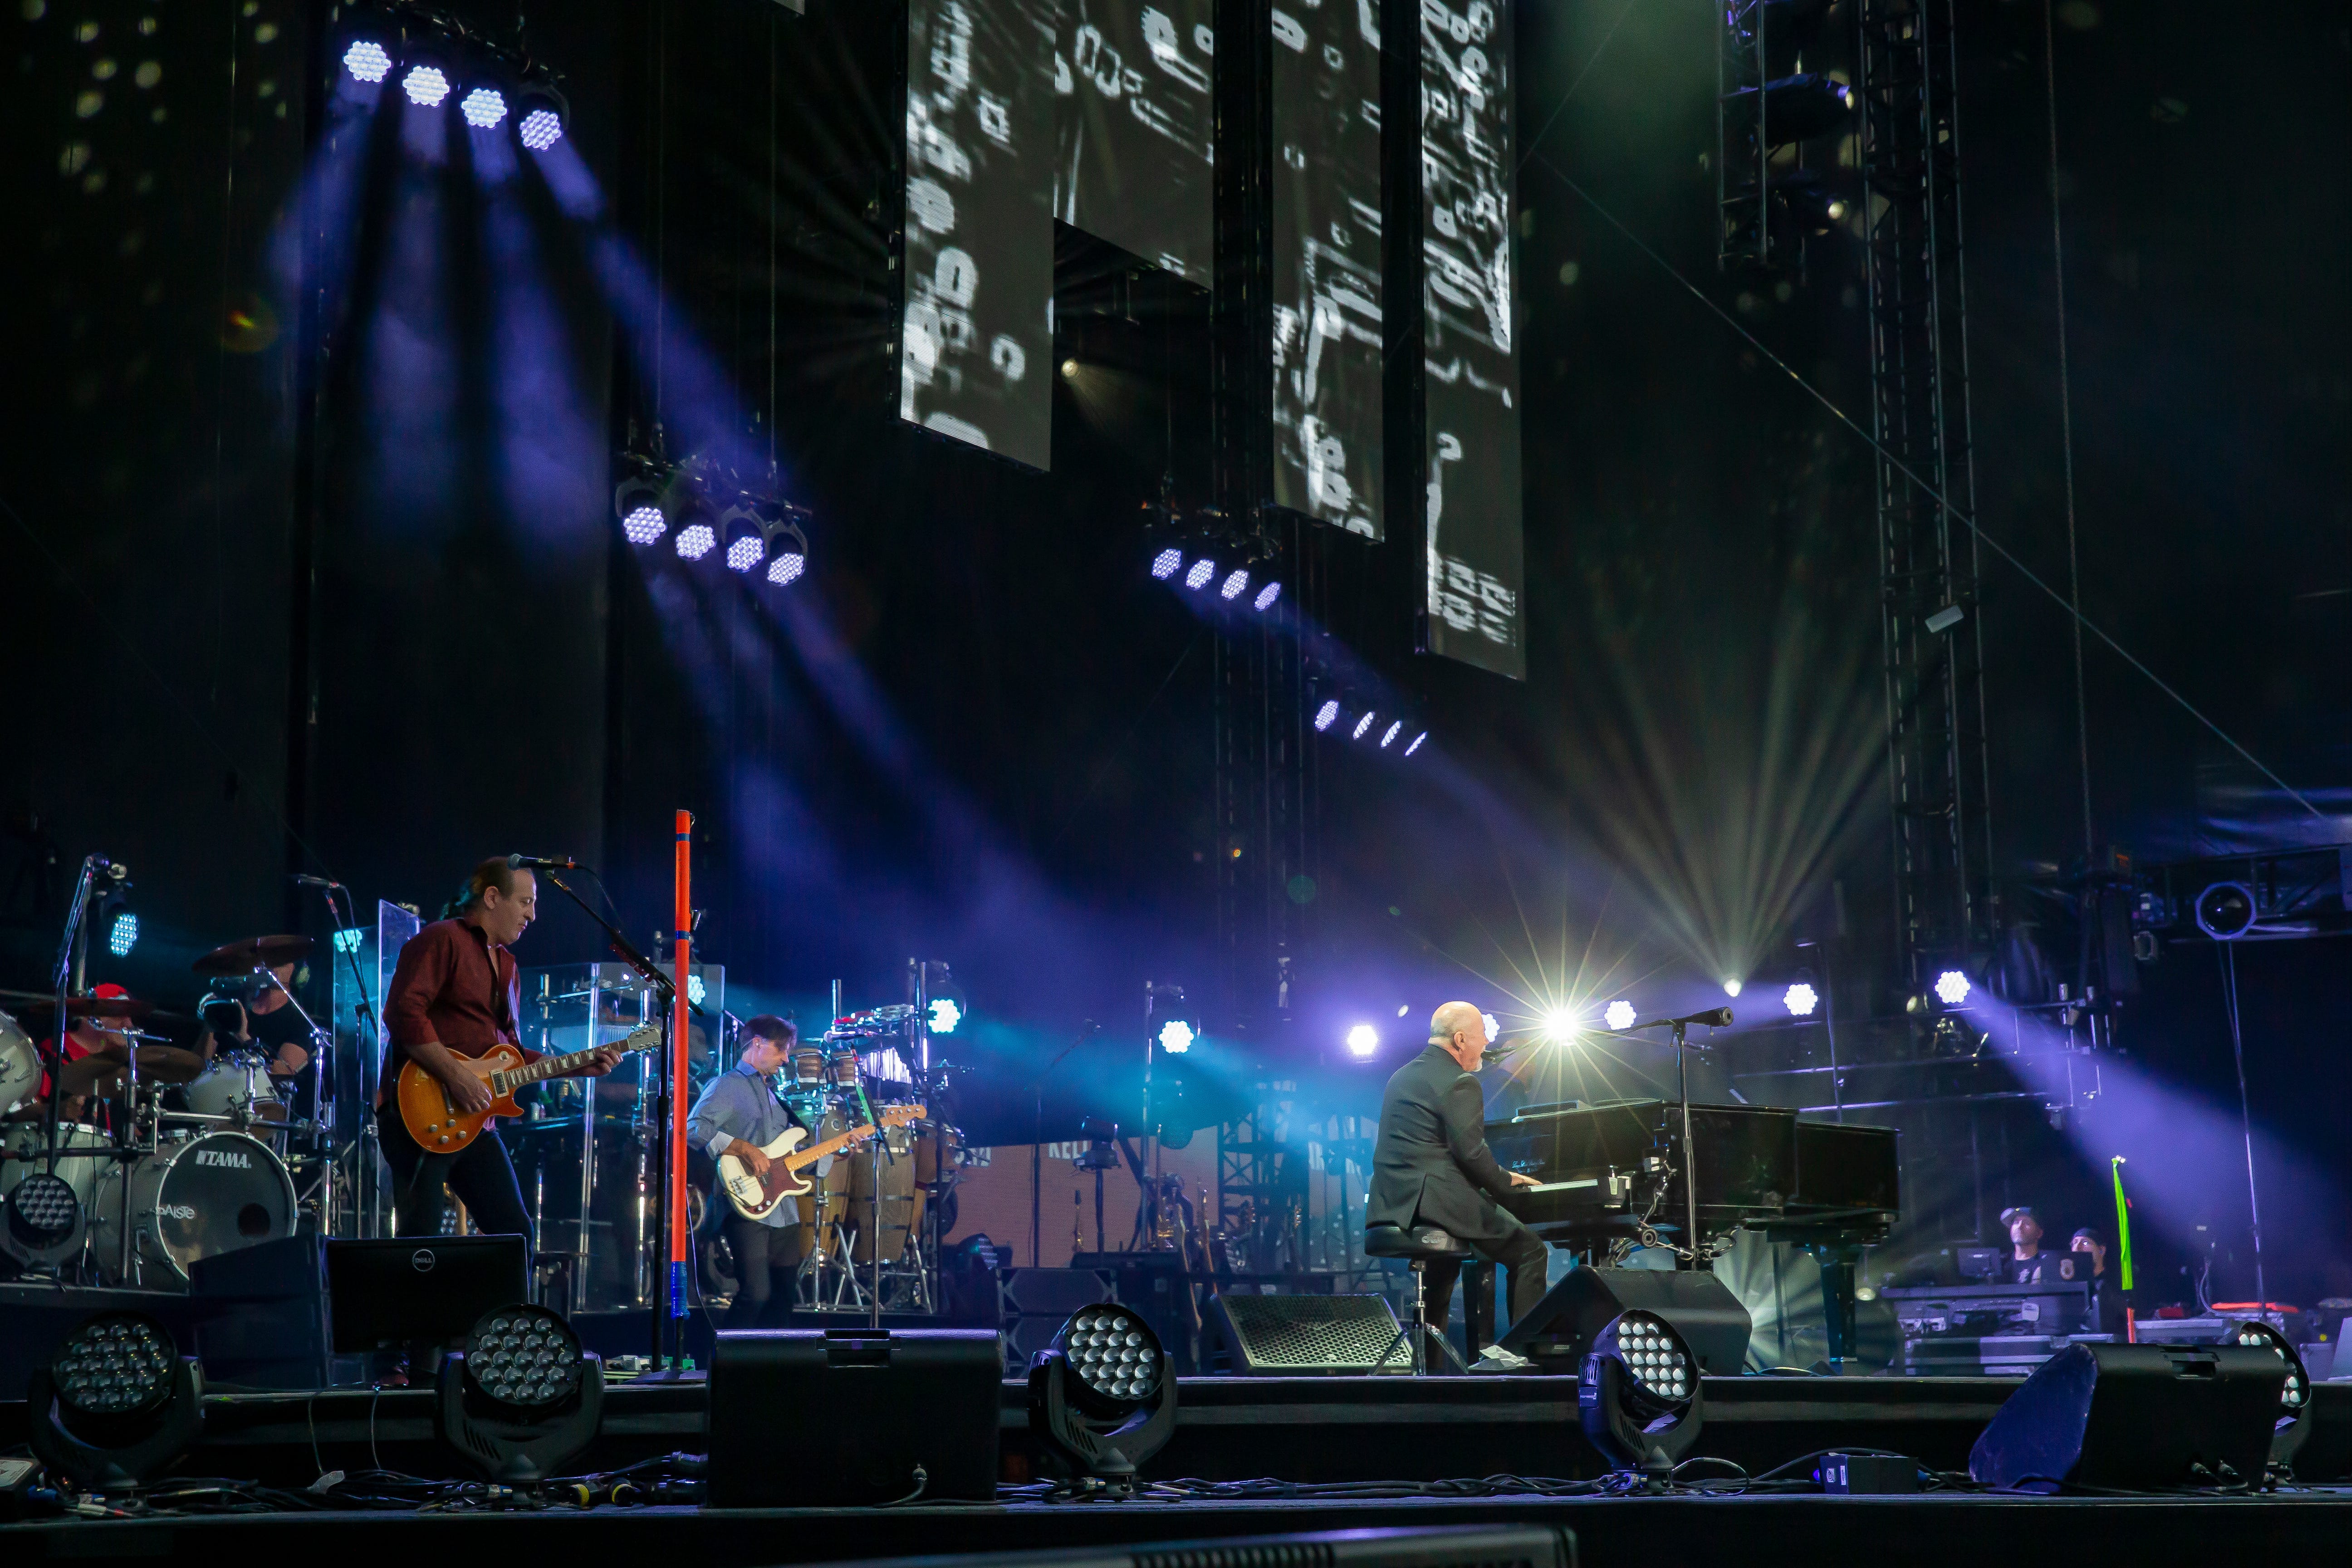 Billy Joel and his band perform at Comerica Park in Detroit.